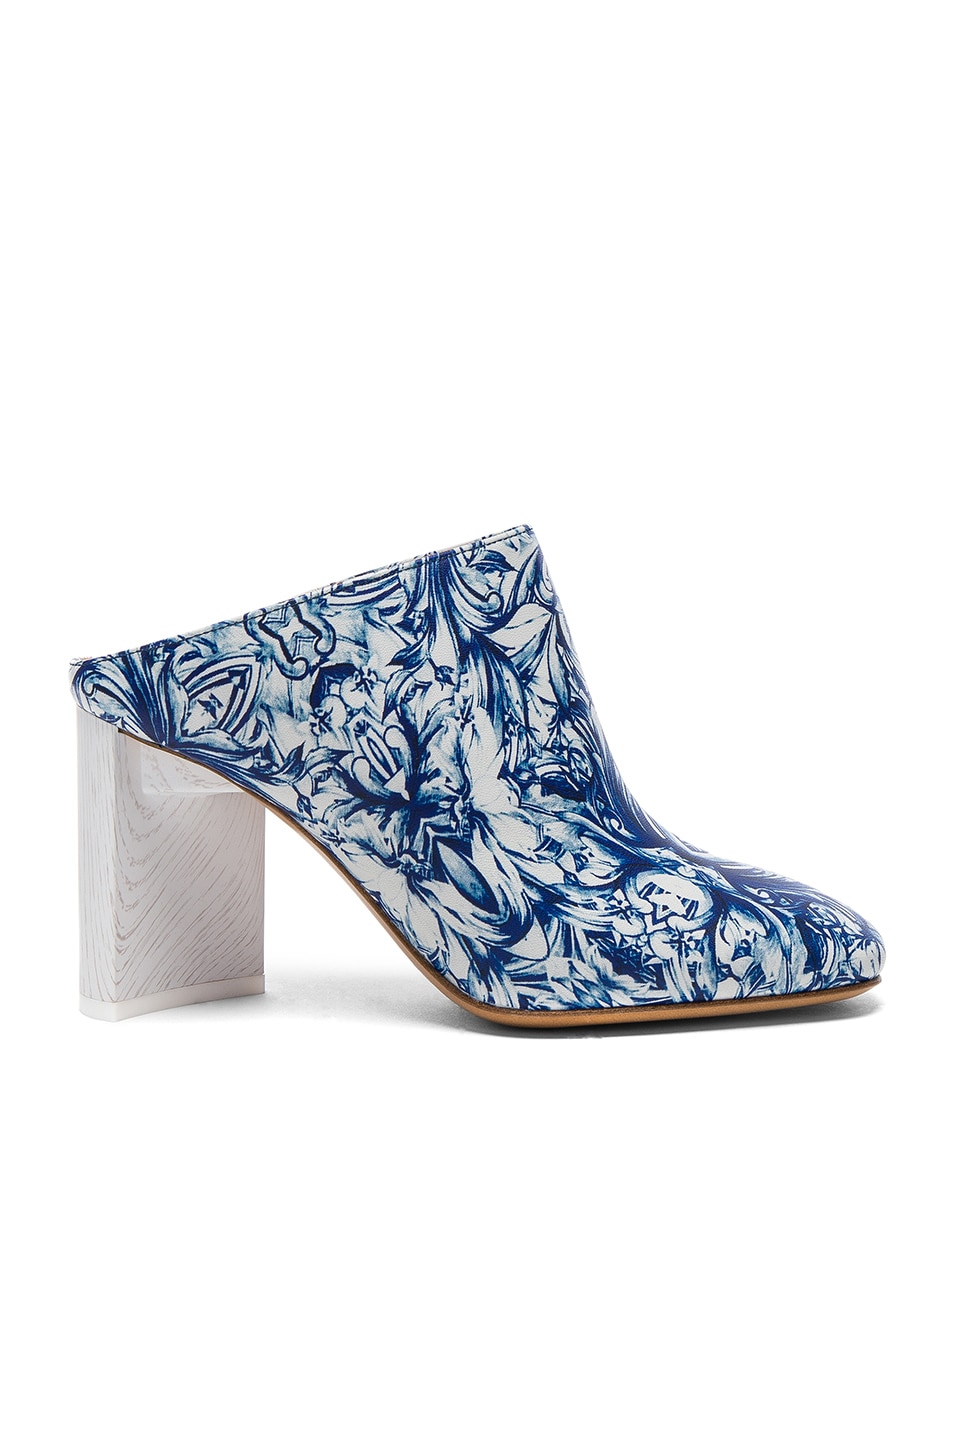 Image 1 of Maison Margiela Printed Leather Mules in Unique Variant